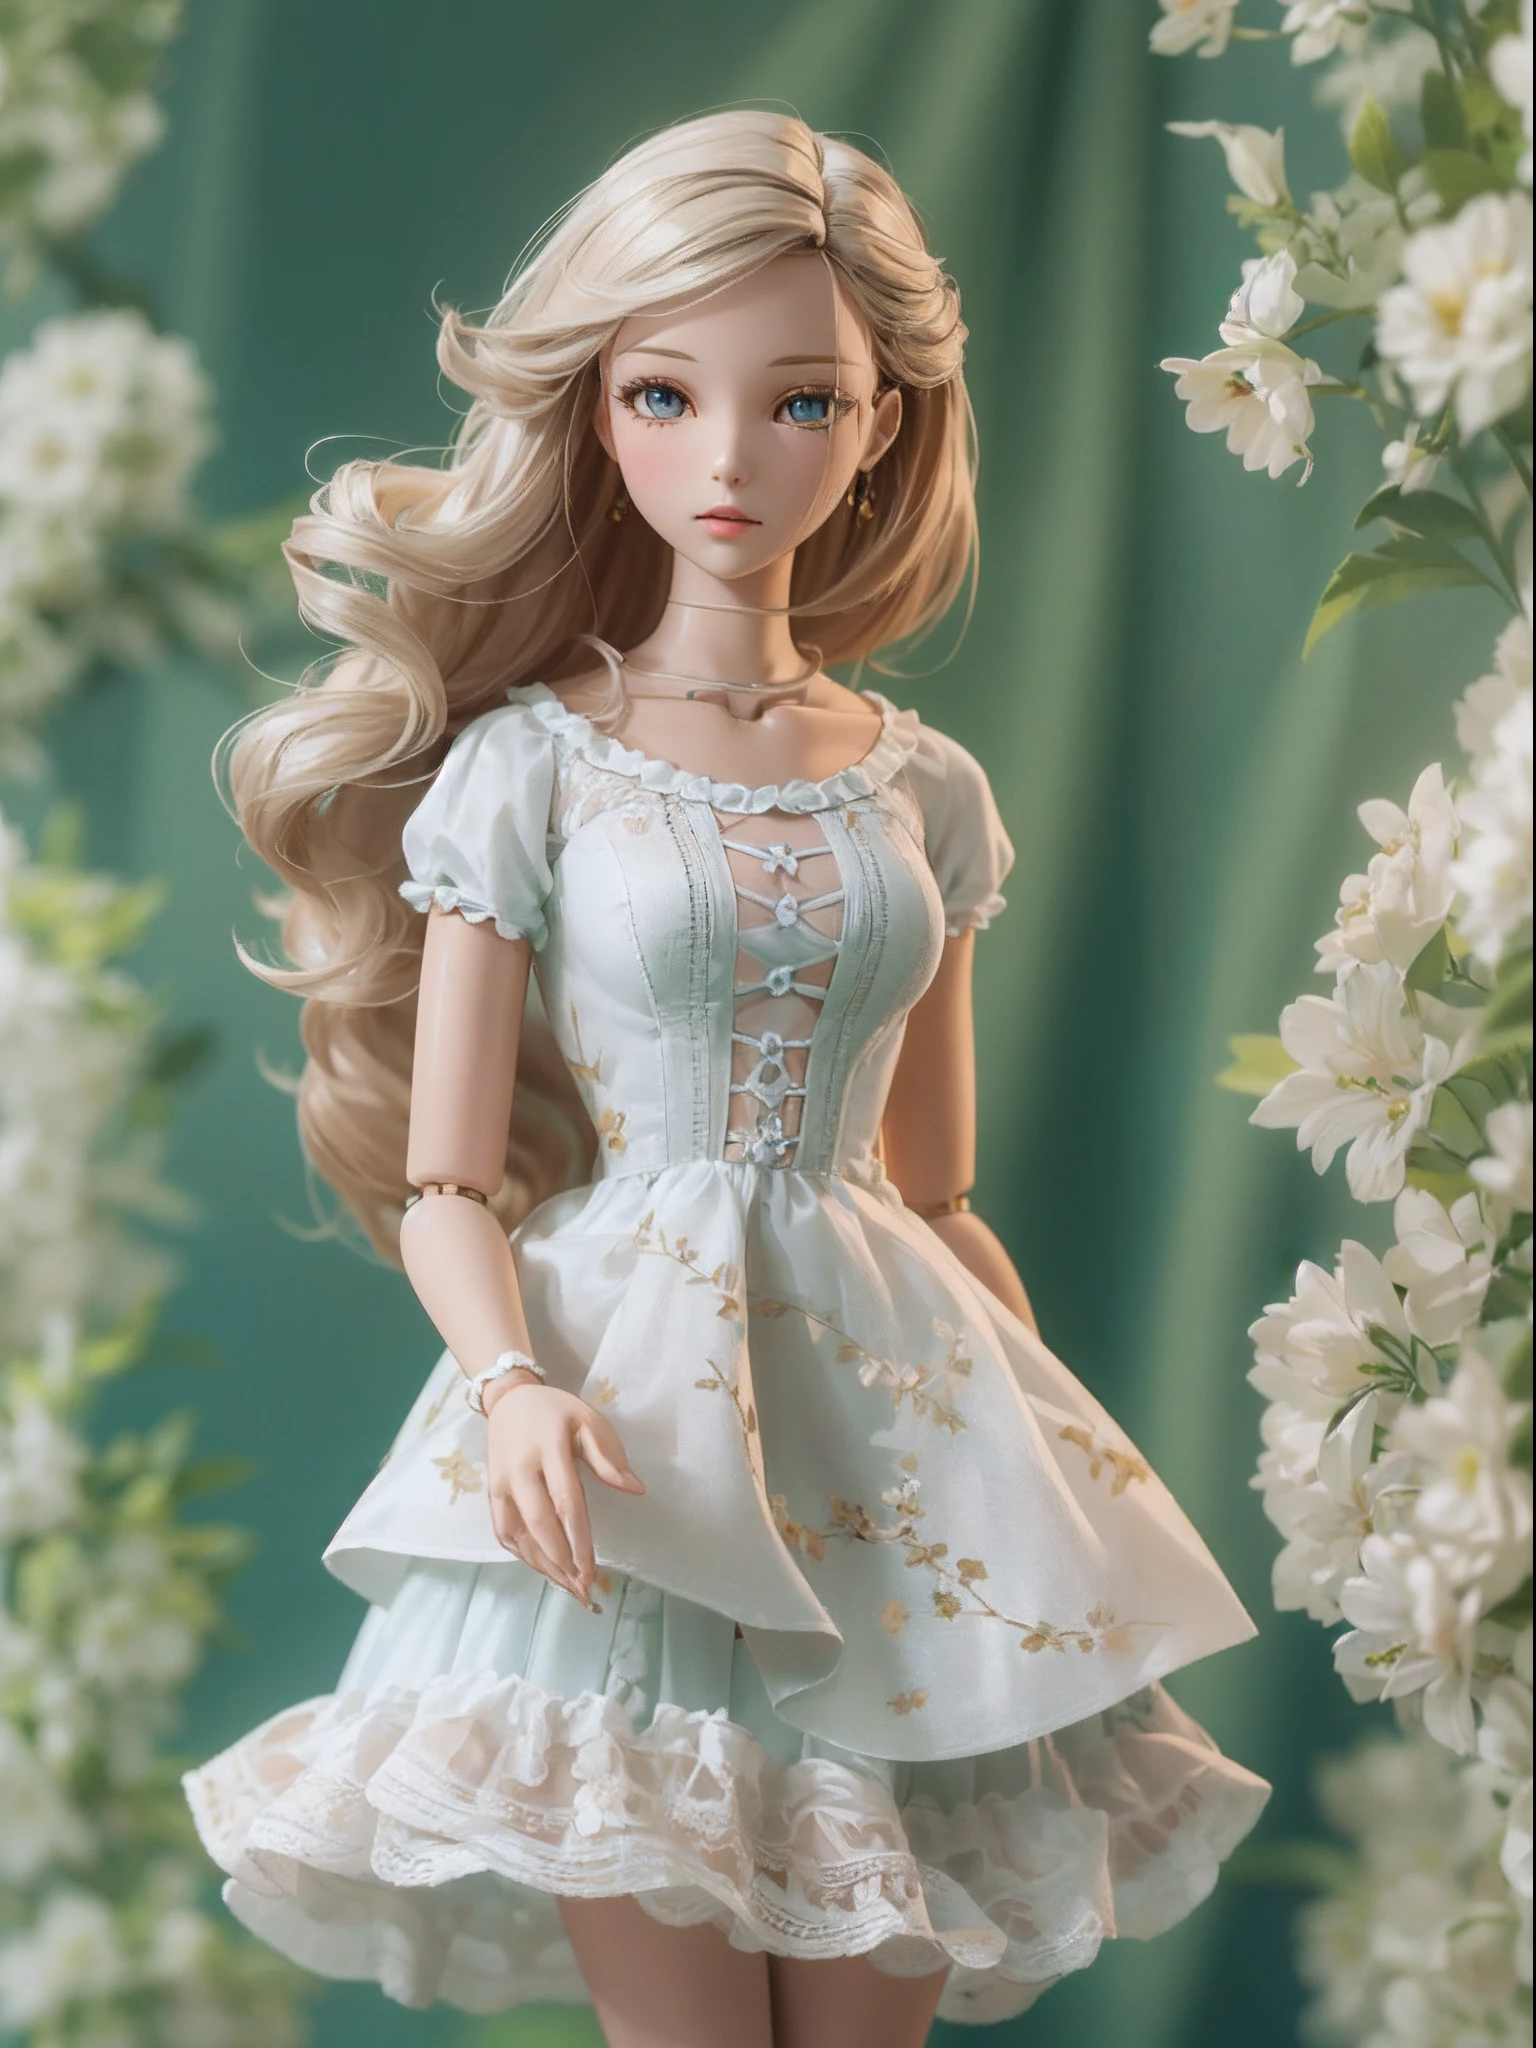 In a soft 3D rendering, a (beautiful ball-jointed doll) stands gracefully. She is dressed in a summer dress, the fabric flowing elegantly around her. The doll's delicate features are expertly crafted, and she exudes an air of sophistication and refinement. It's a stunning image, full of beauty and detail.